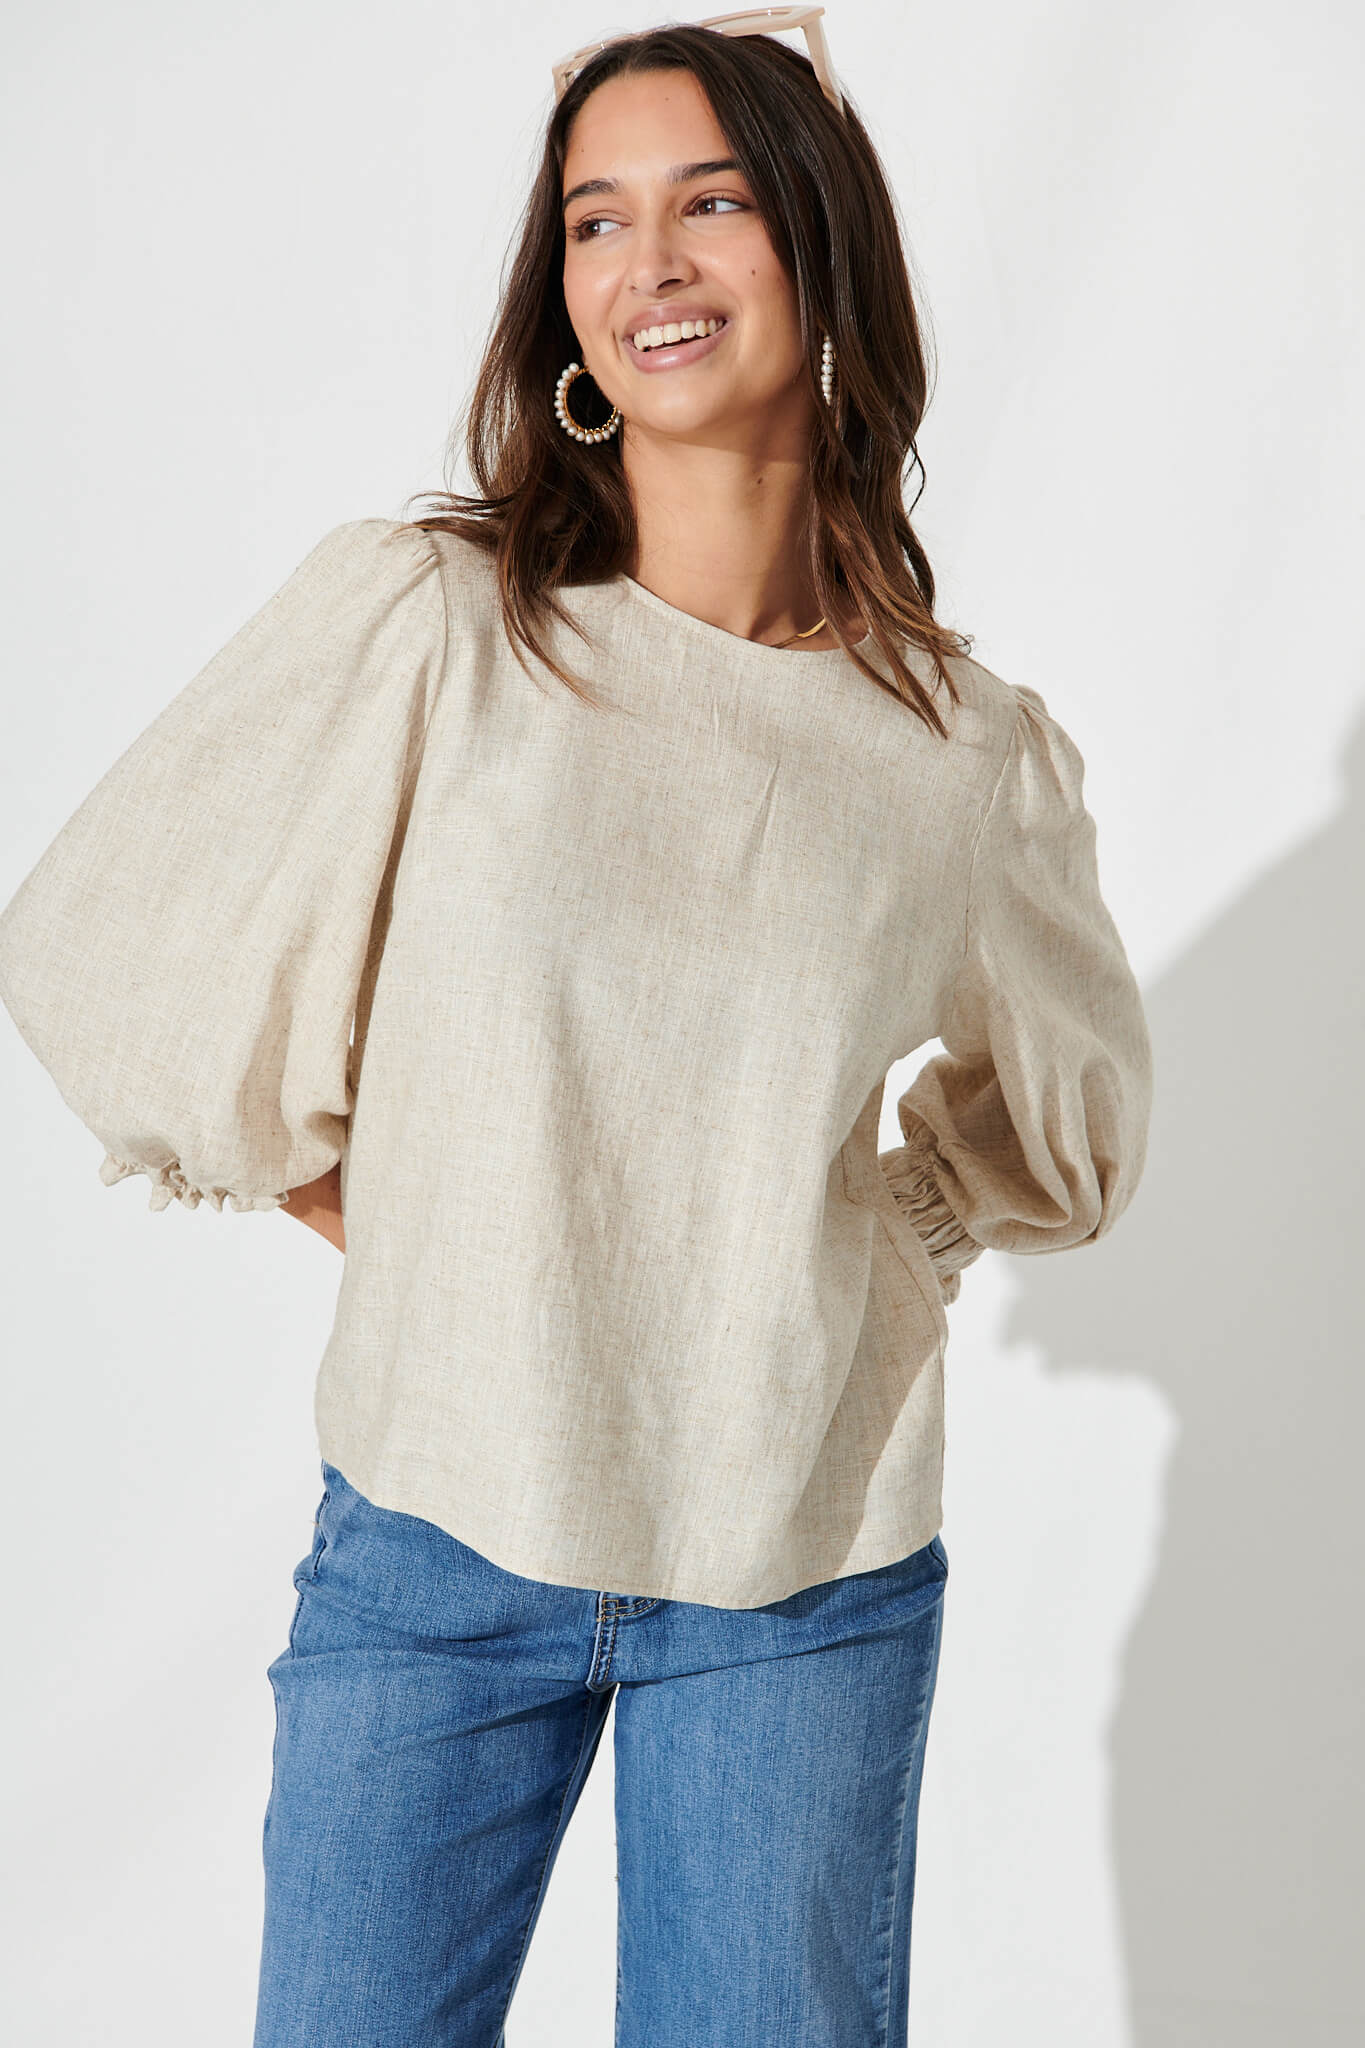 Lanie Top In Oatmeal Cotton Linen - front